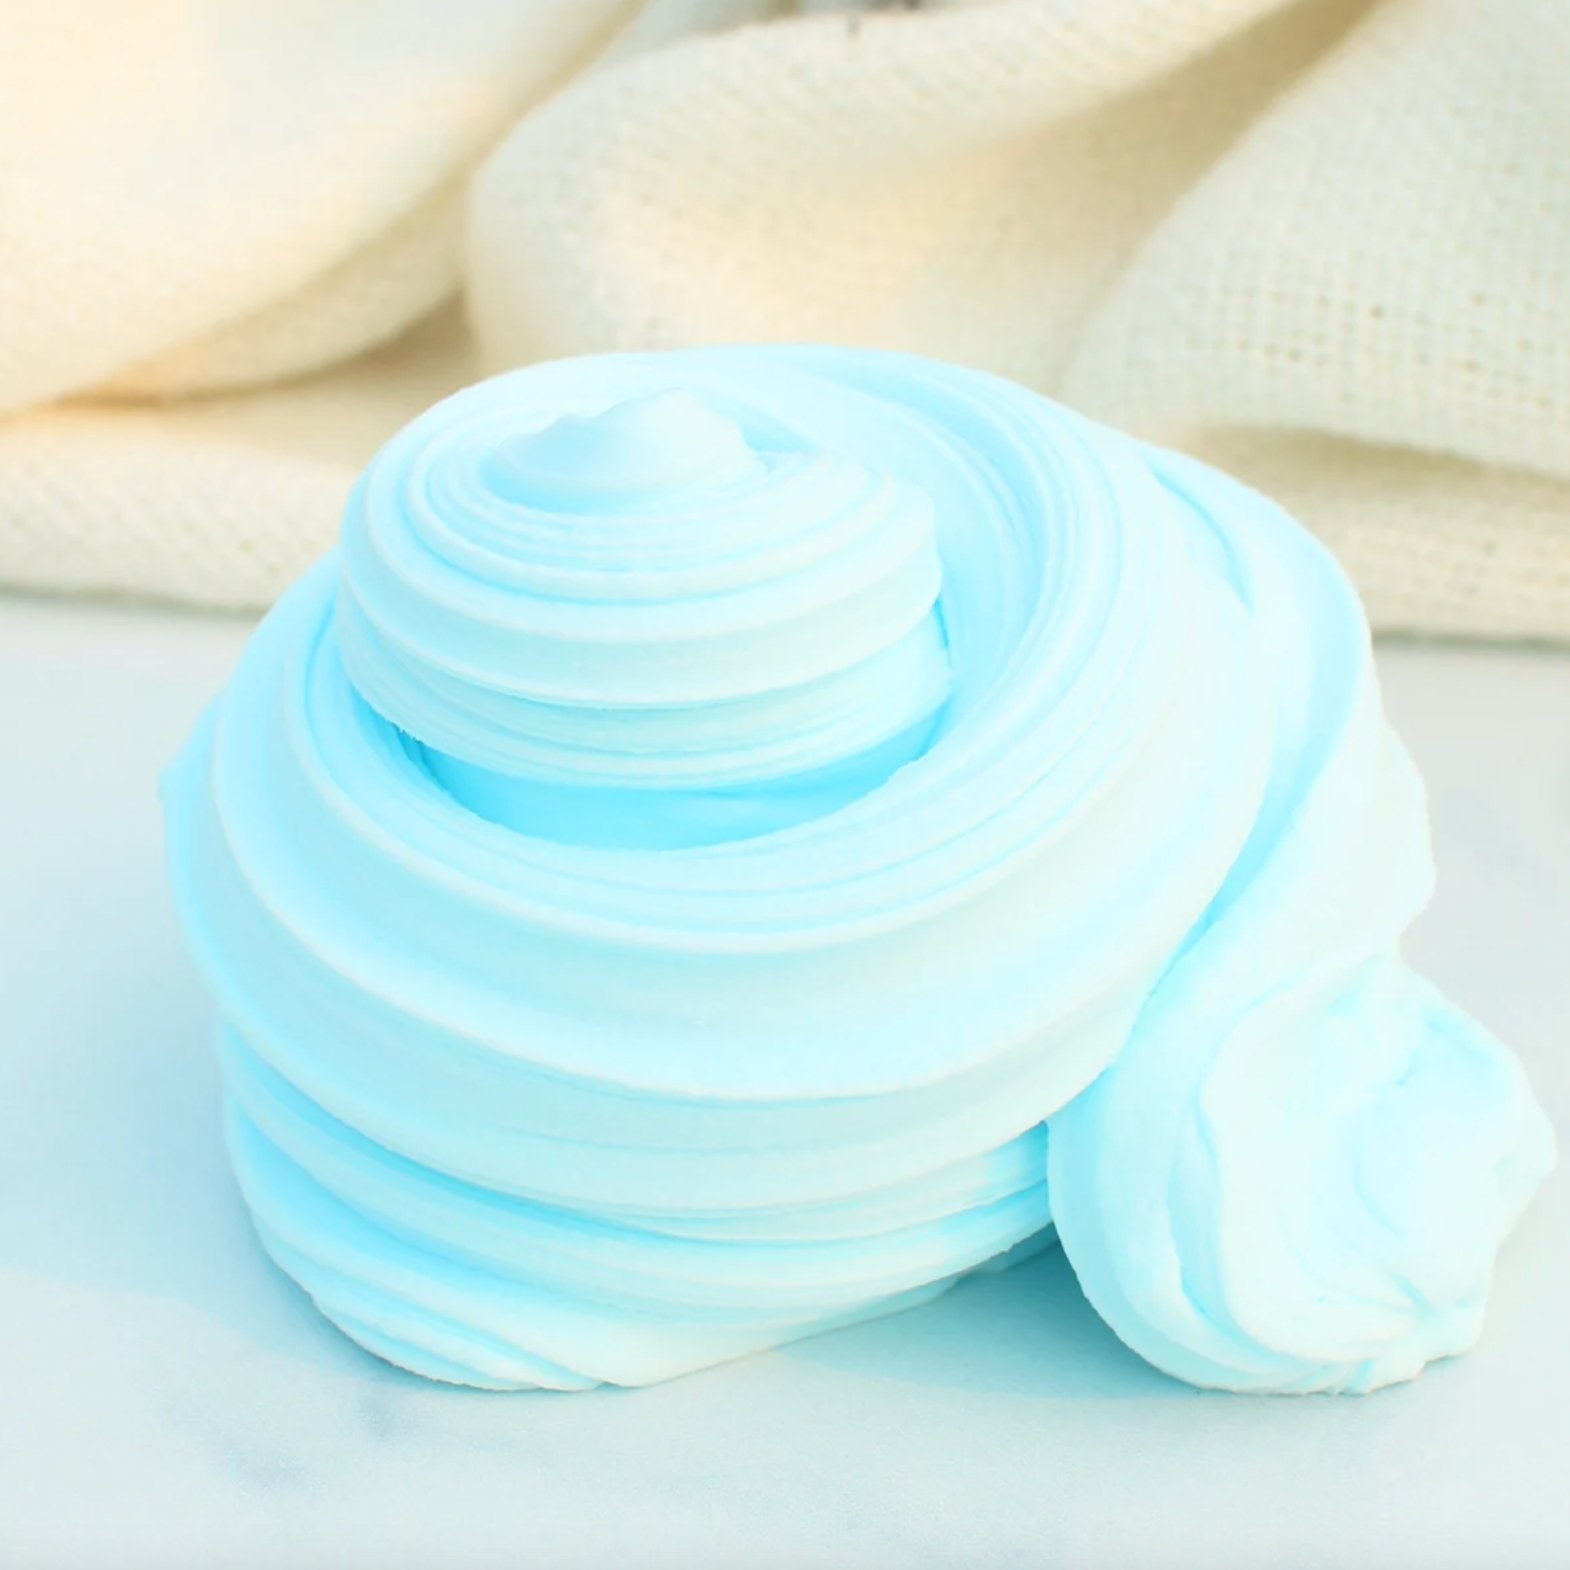 Bye Bye Anxiety Blue Relief Toy Tool Stress Sensory Therapy Dough Aromatherapy Essential Oil Scented Slime Fantasies Shop 7oz Front View Swirl